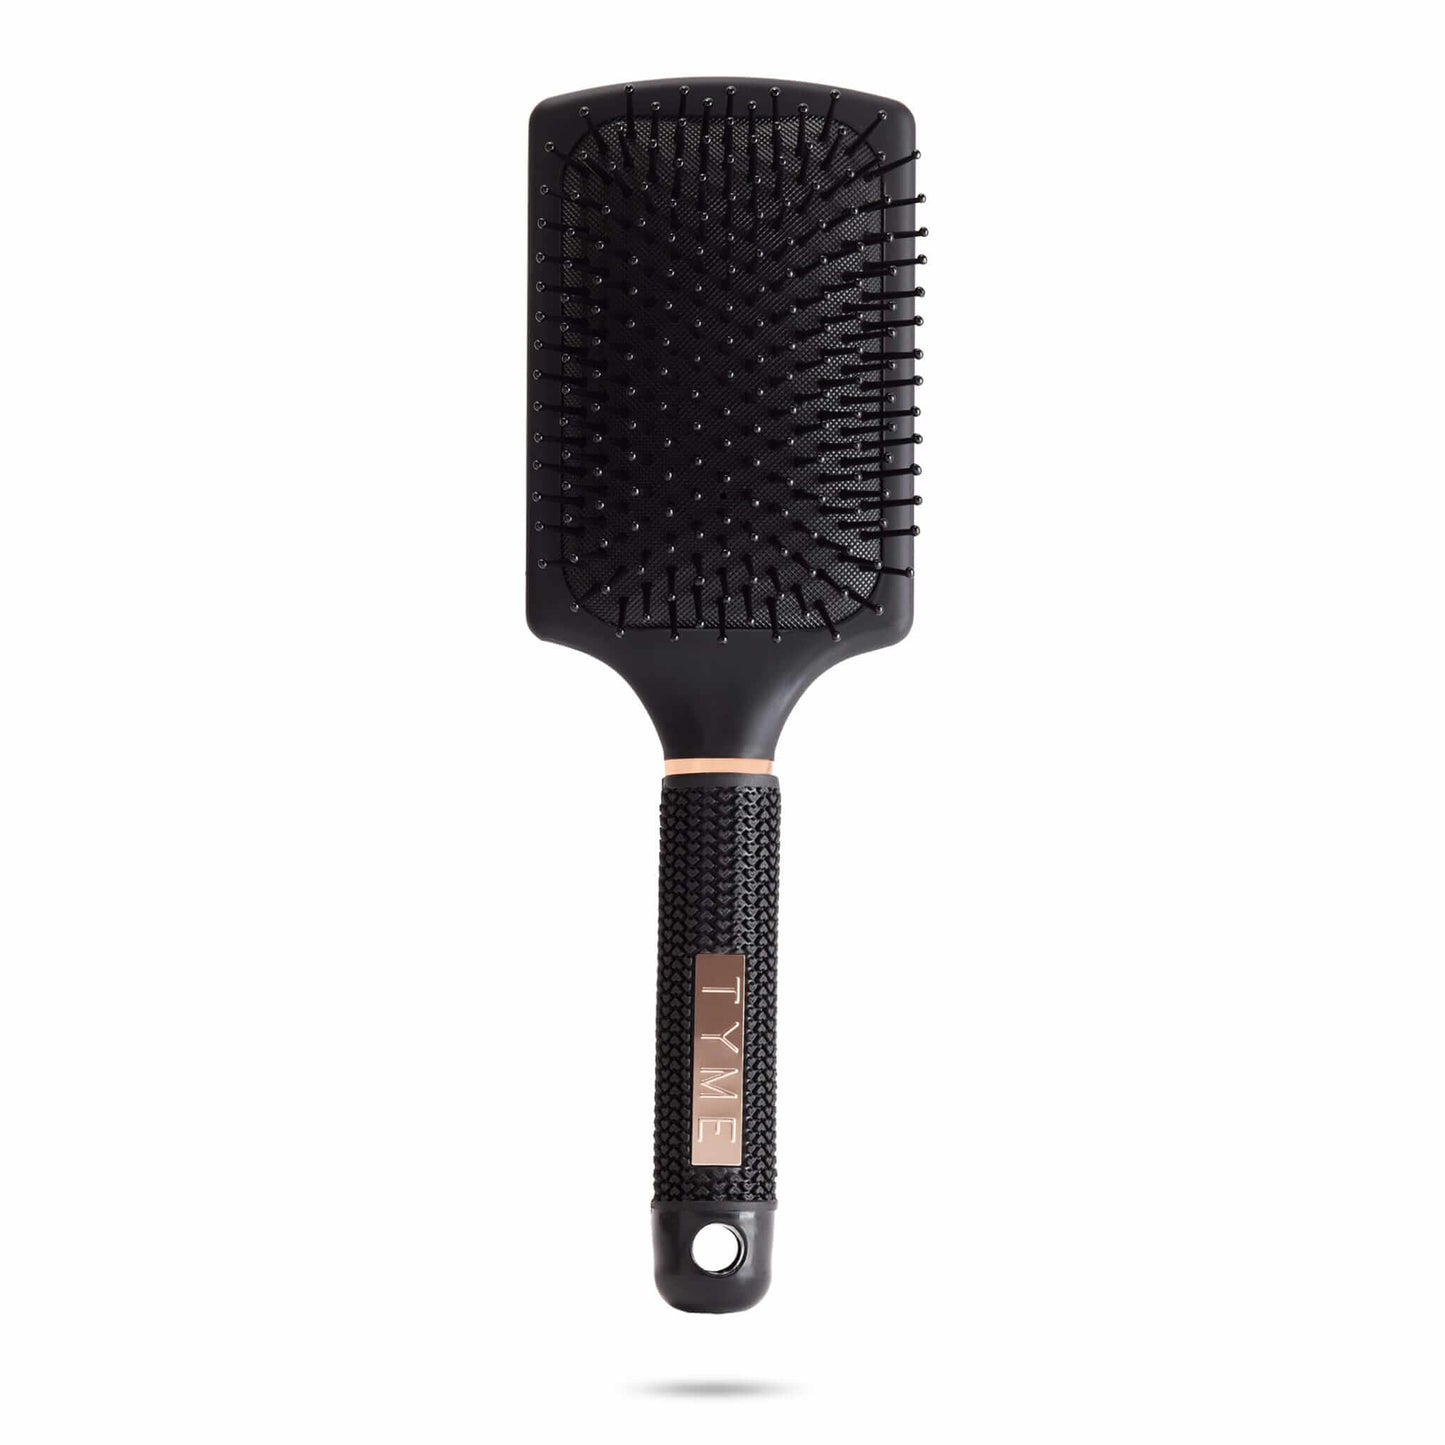 High quality bristles in Obsidian black paddle hairbrush.